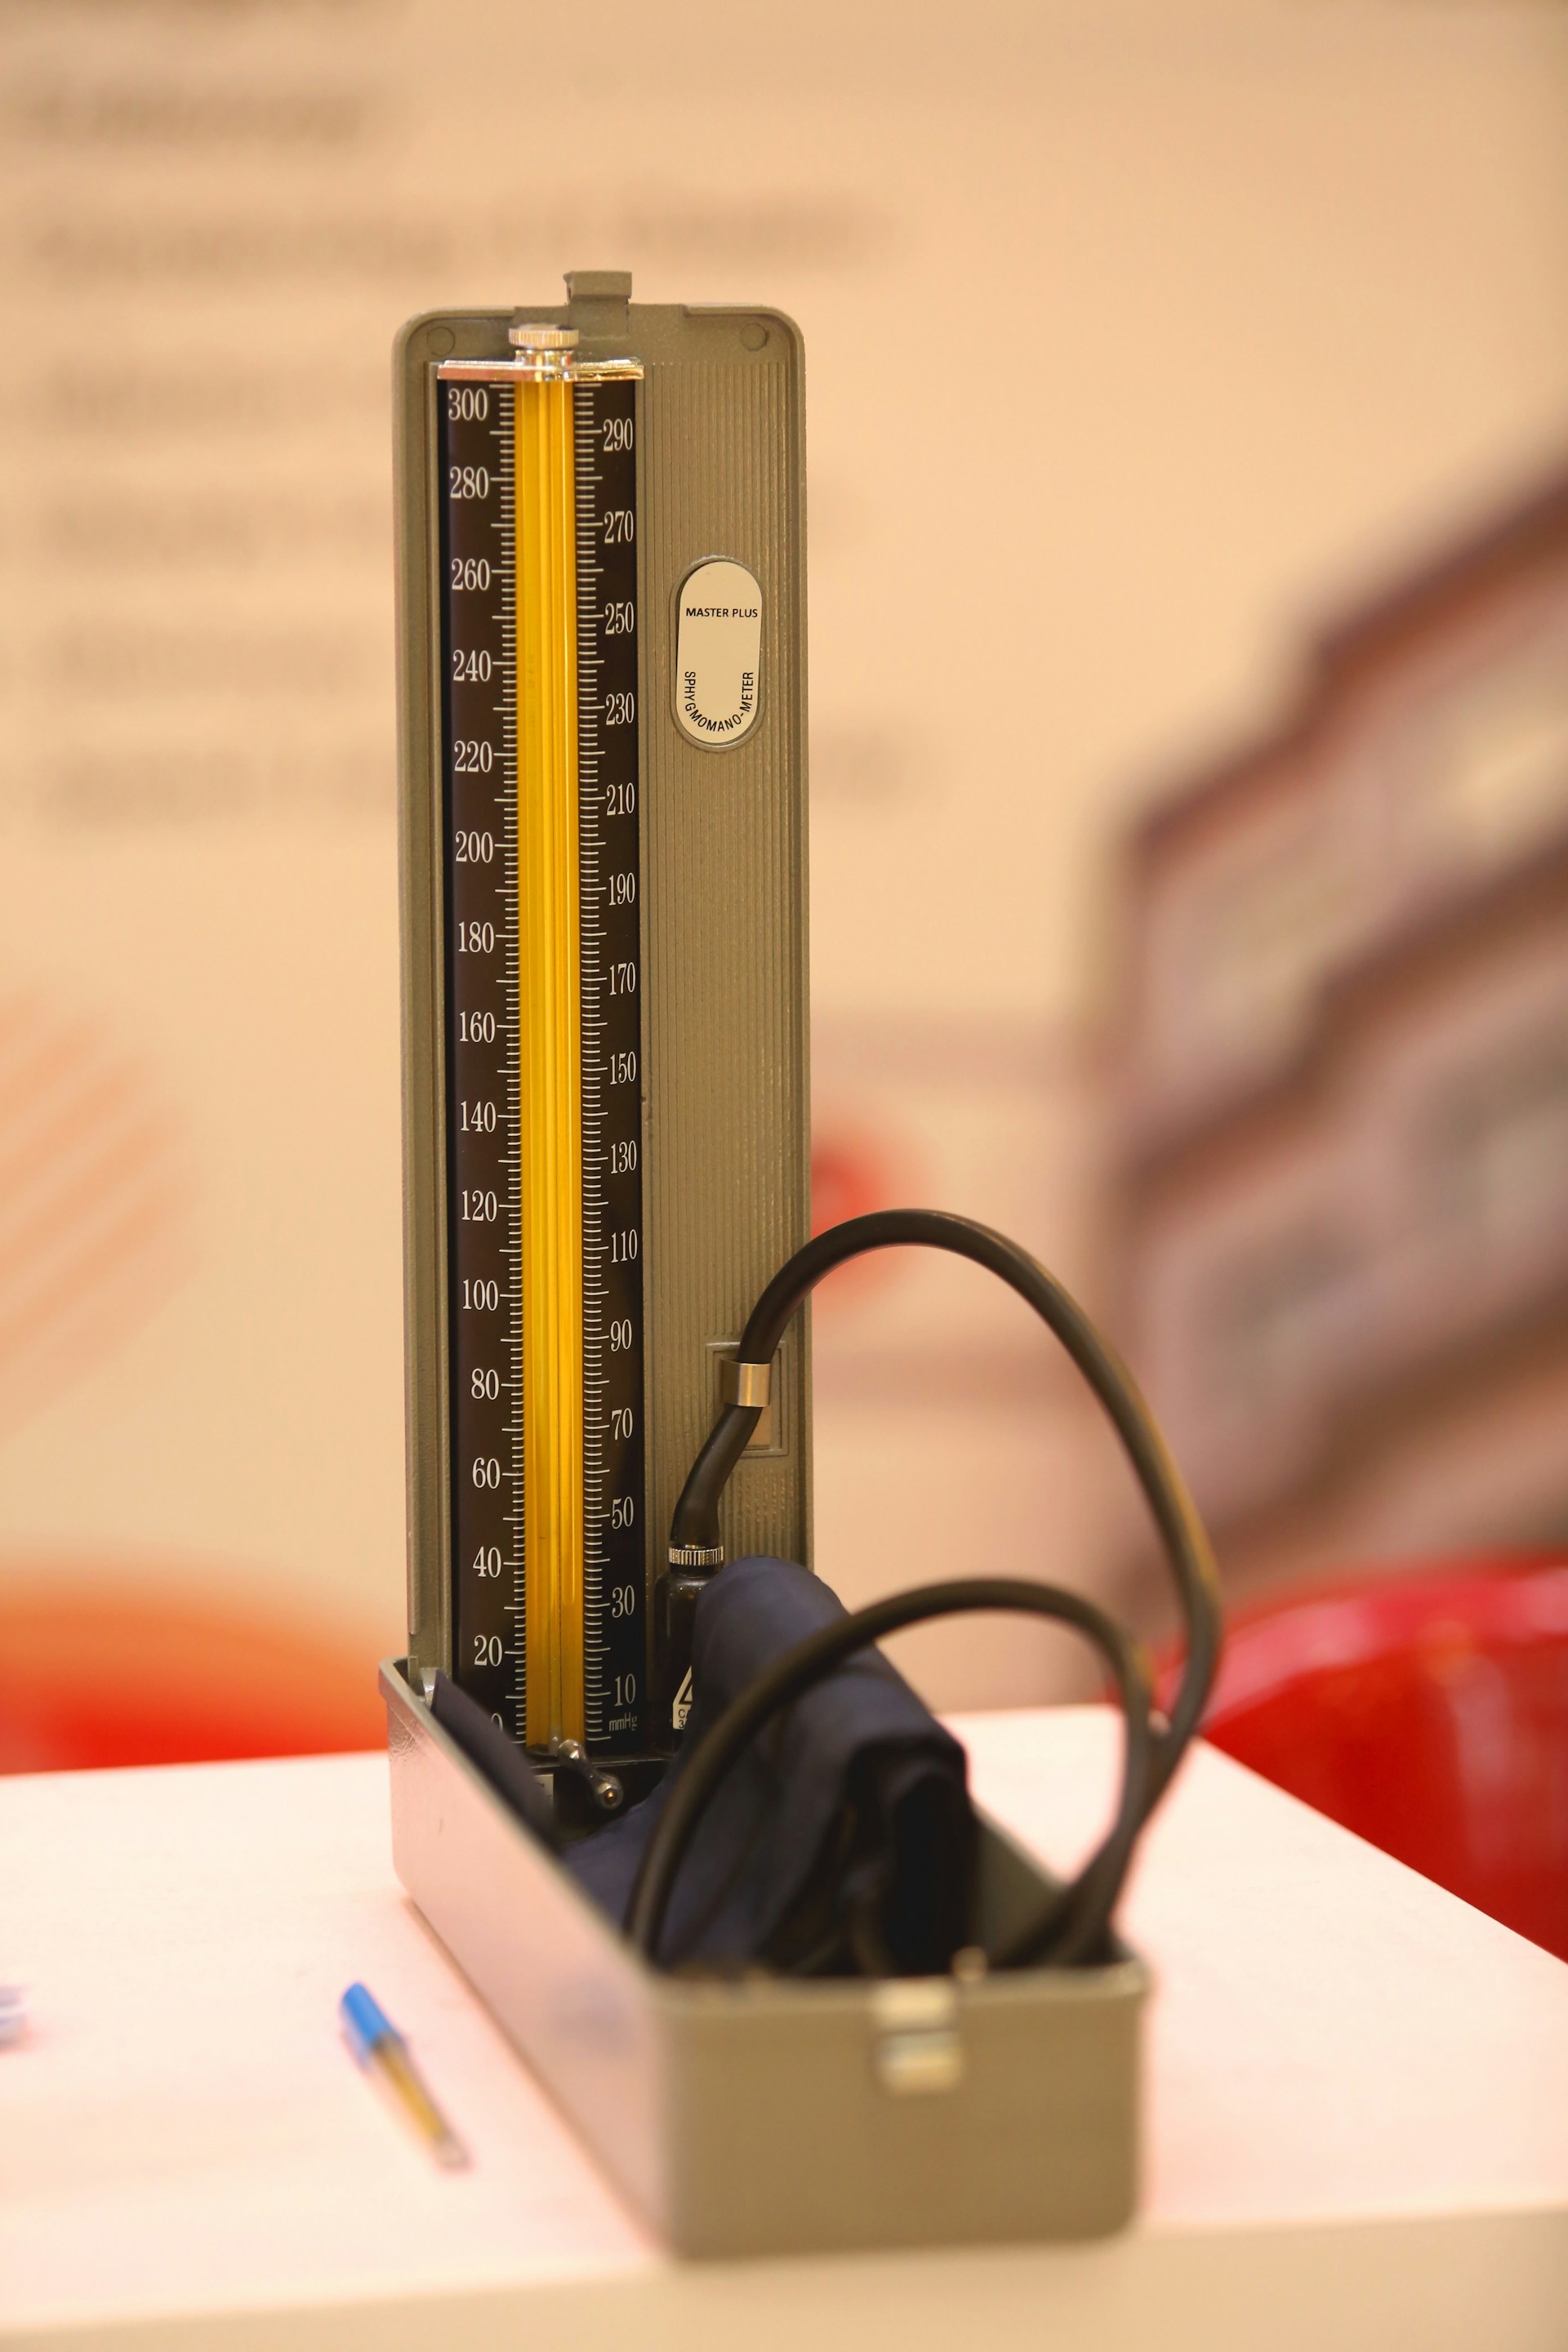 a photo of an anaolog blood pressure meter, including a cuff with tube neatly coiled, and a vertical bar with markers for different pressure levels in two scales